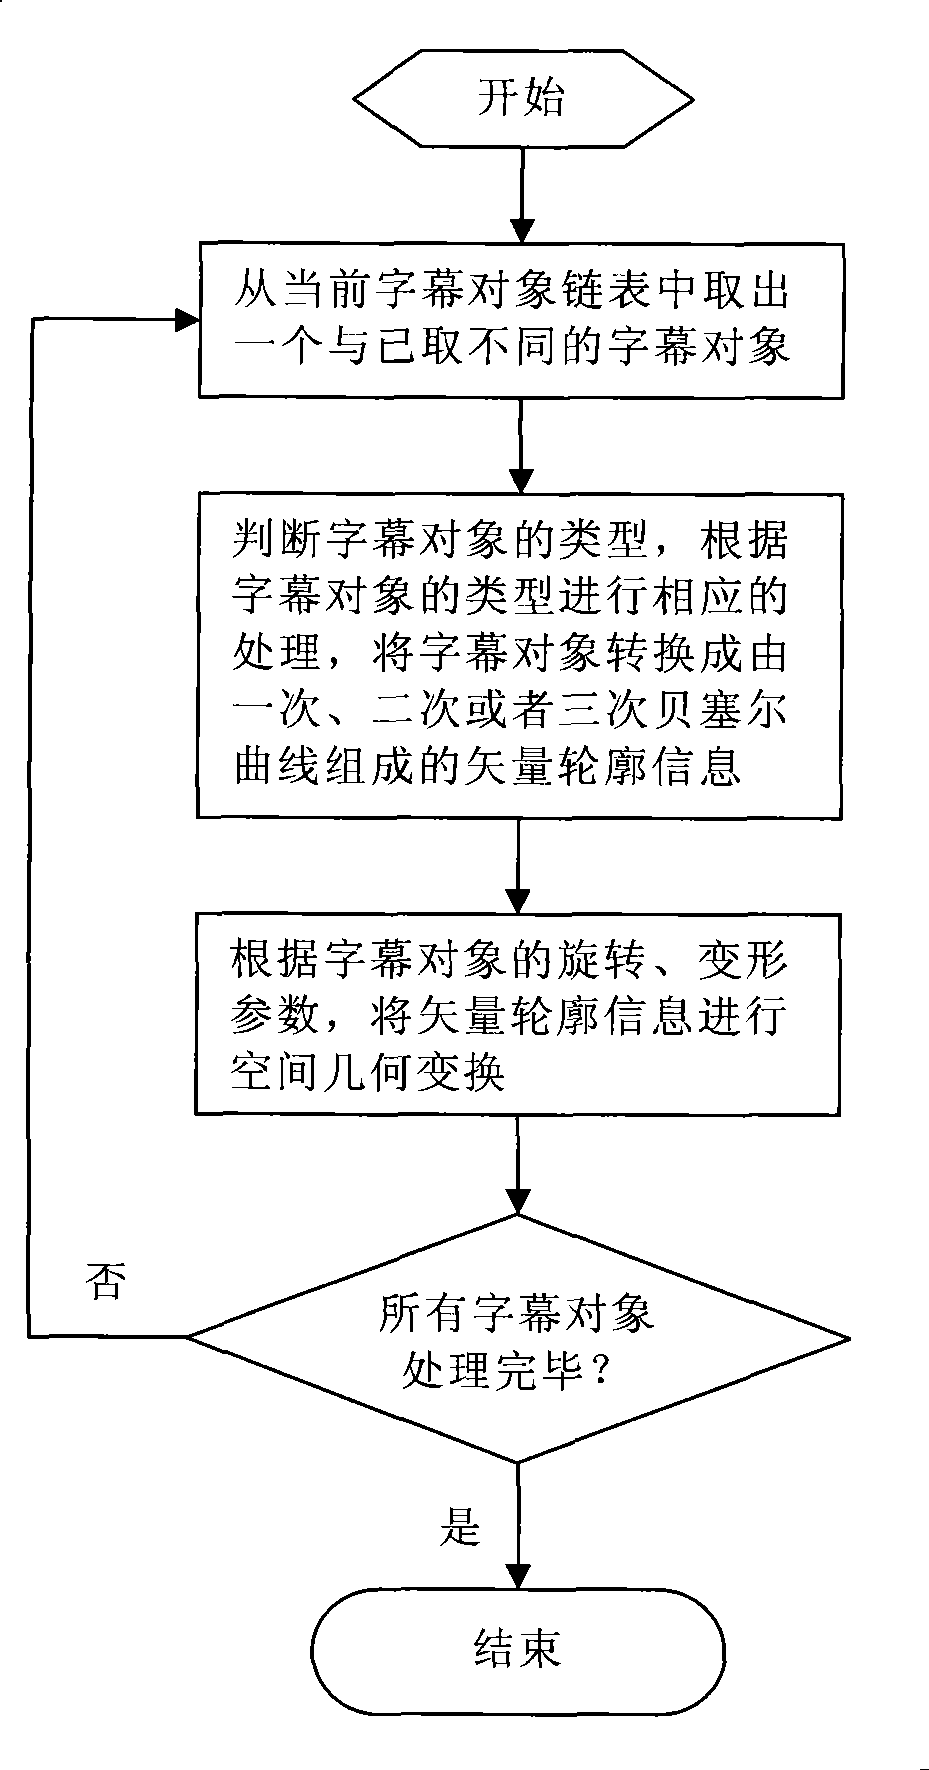 Method for transforming subtitling object into Bessel curve